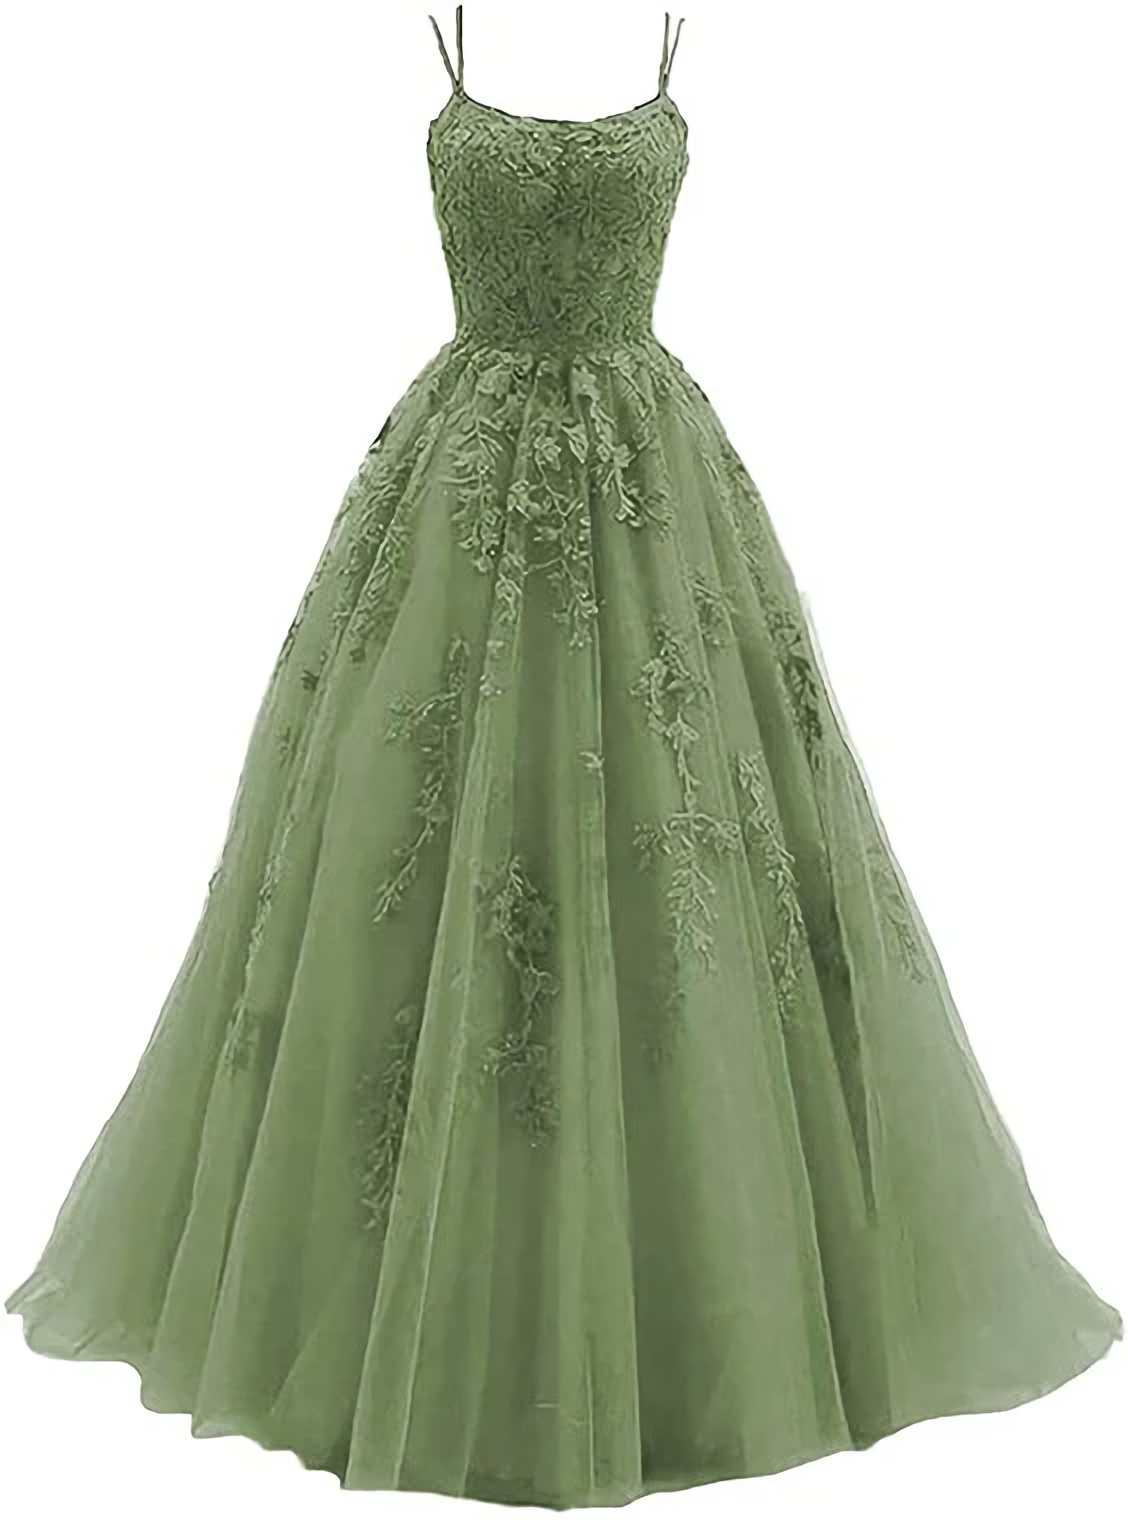 Formal Dress Fashion, Green Lace Applique Tulle Long Straps Cross Back Long Party Dress, Green Junior Prom Dress